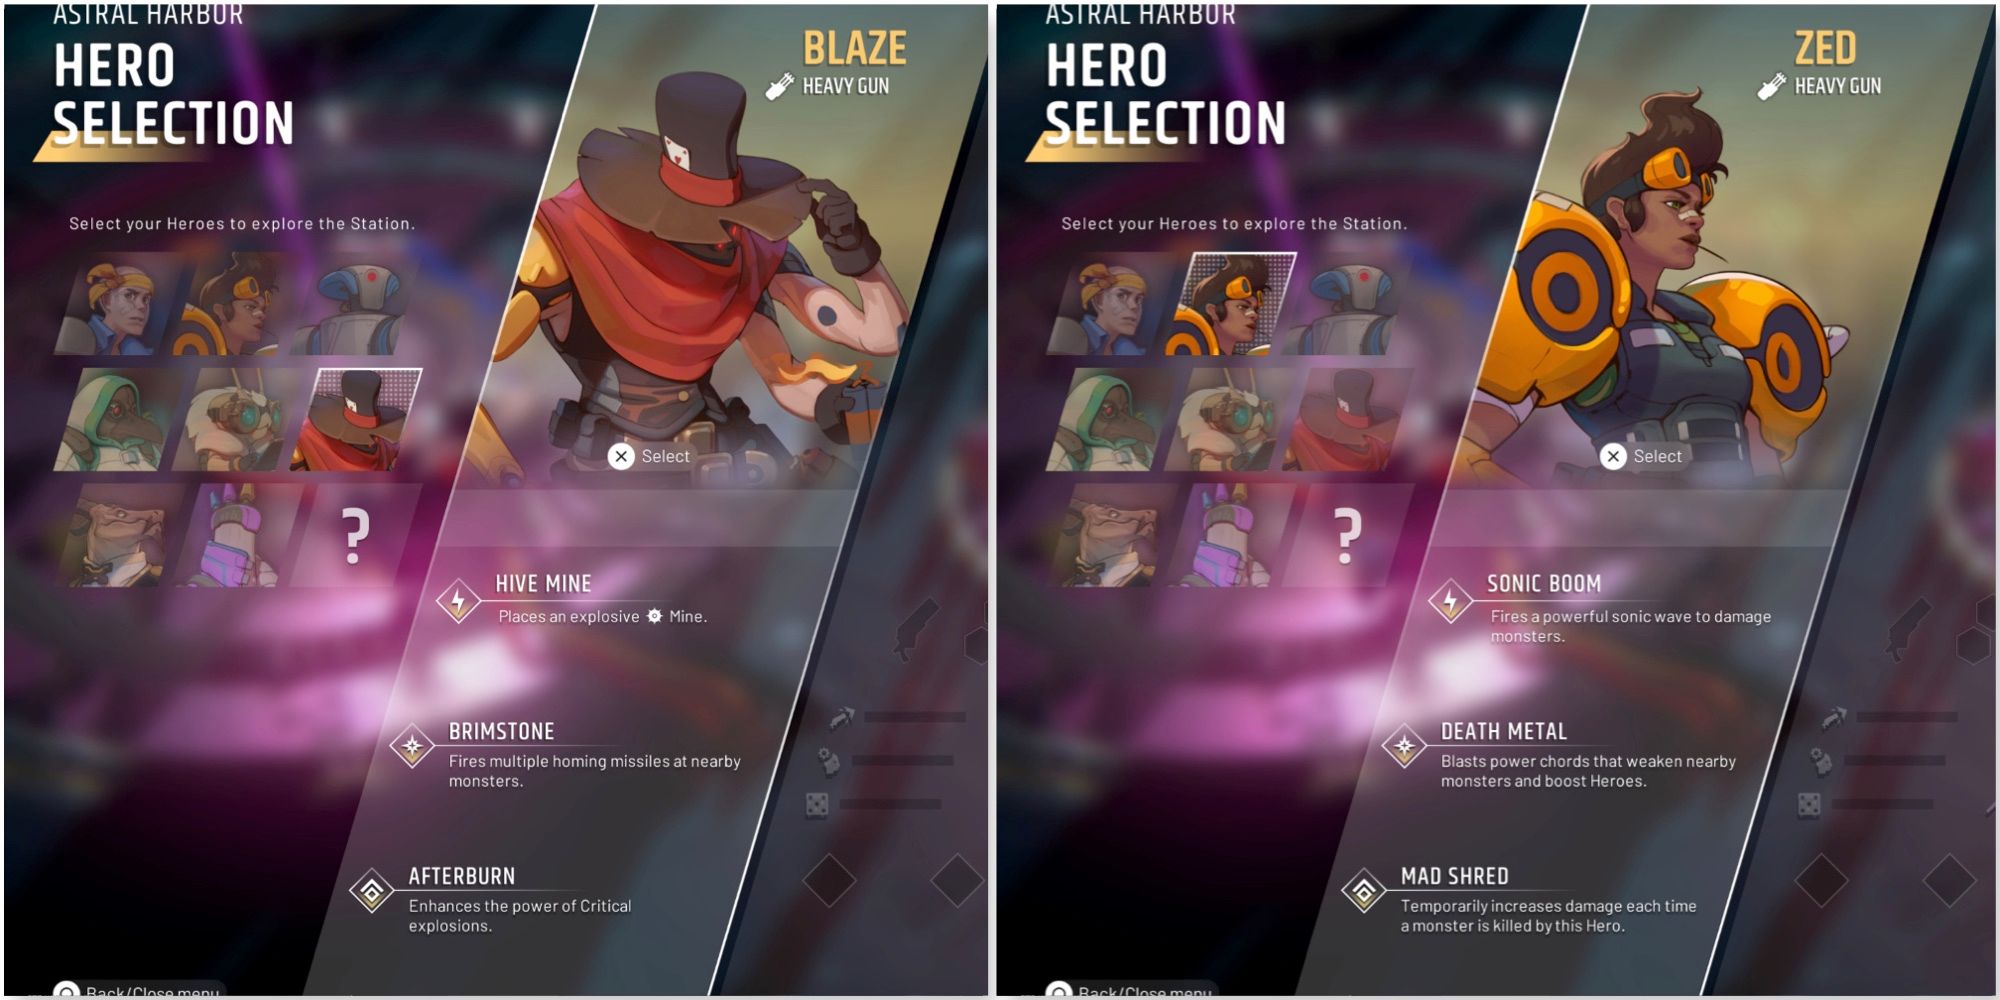 Blaze and Zed in the hero selection screen of Endless Dungeon